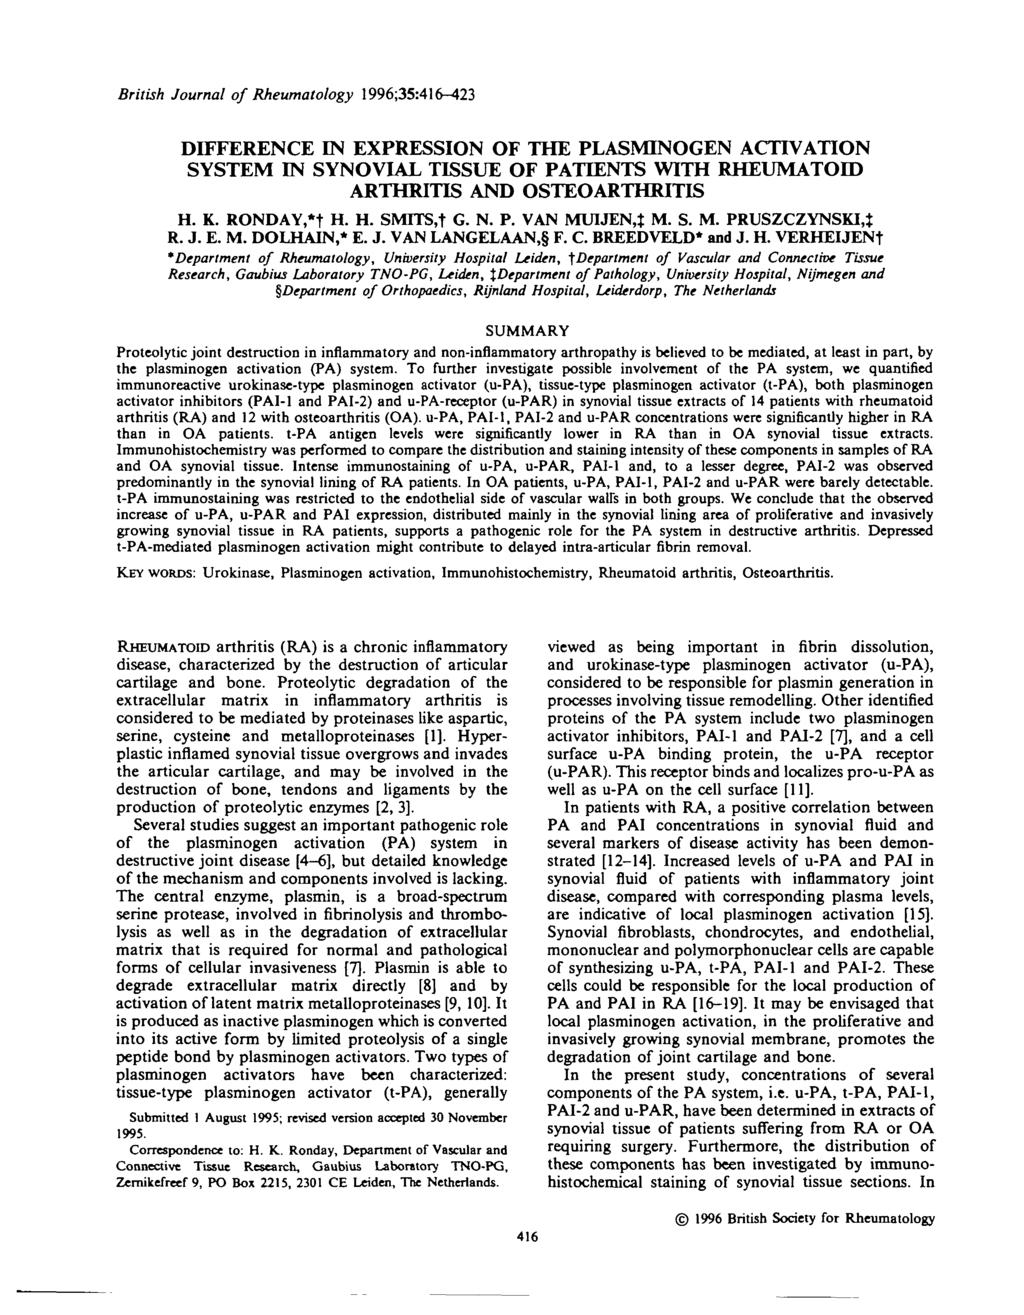 British Journal of Rheumatology 1996;35:416-423 DIFFERENCE IN EXPRESSION OF THE PLASMINOGEN ACTIVATION SYSTEM IN SYNOVIAL TISSUE OF PATIENTS WITH RHEUMATOID ARTHRITIS AND OSTERTHRTTIS H. K.